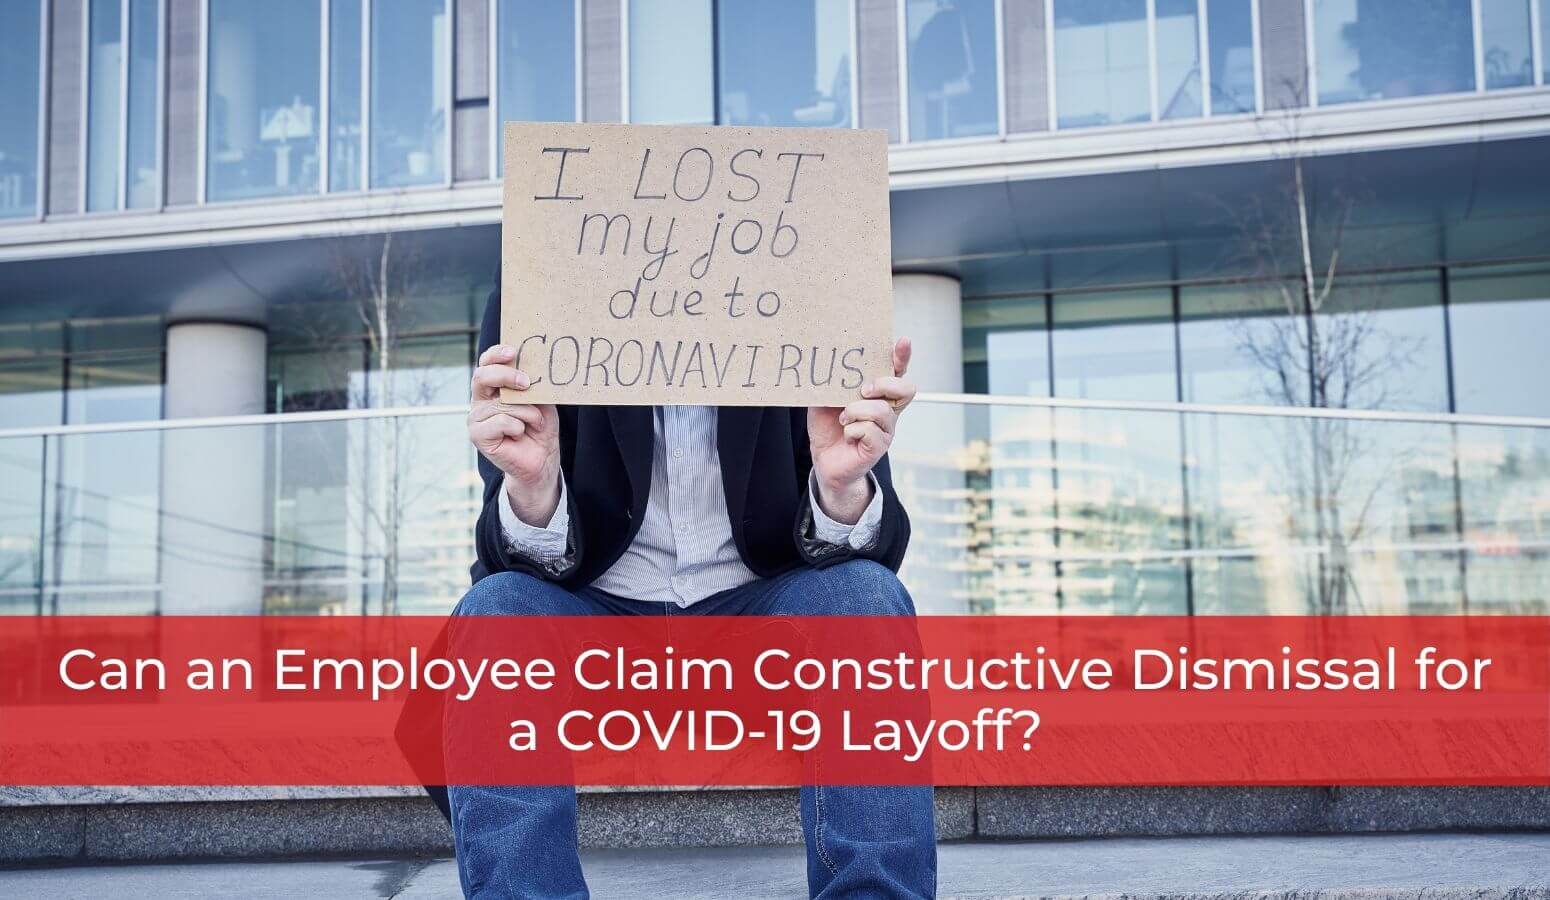 Featured image for “Can an Employee Claim Constructive Dismissal for a COVID-19 Layoff?”